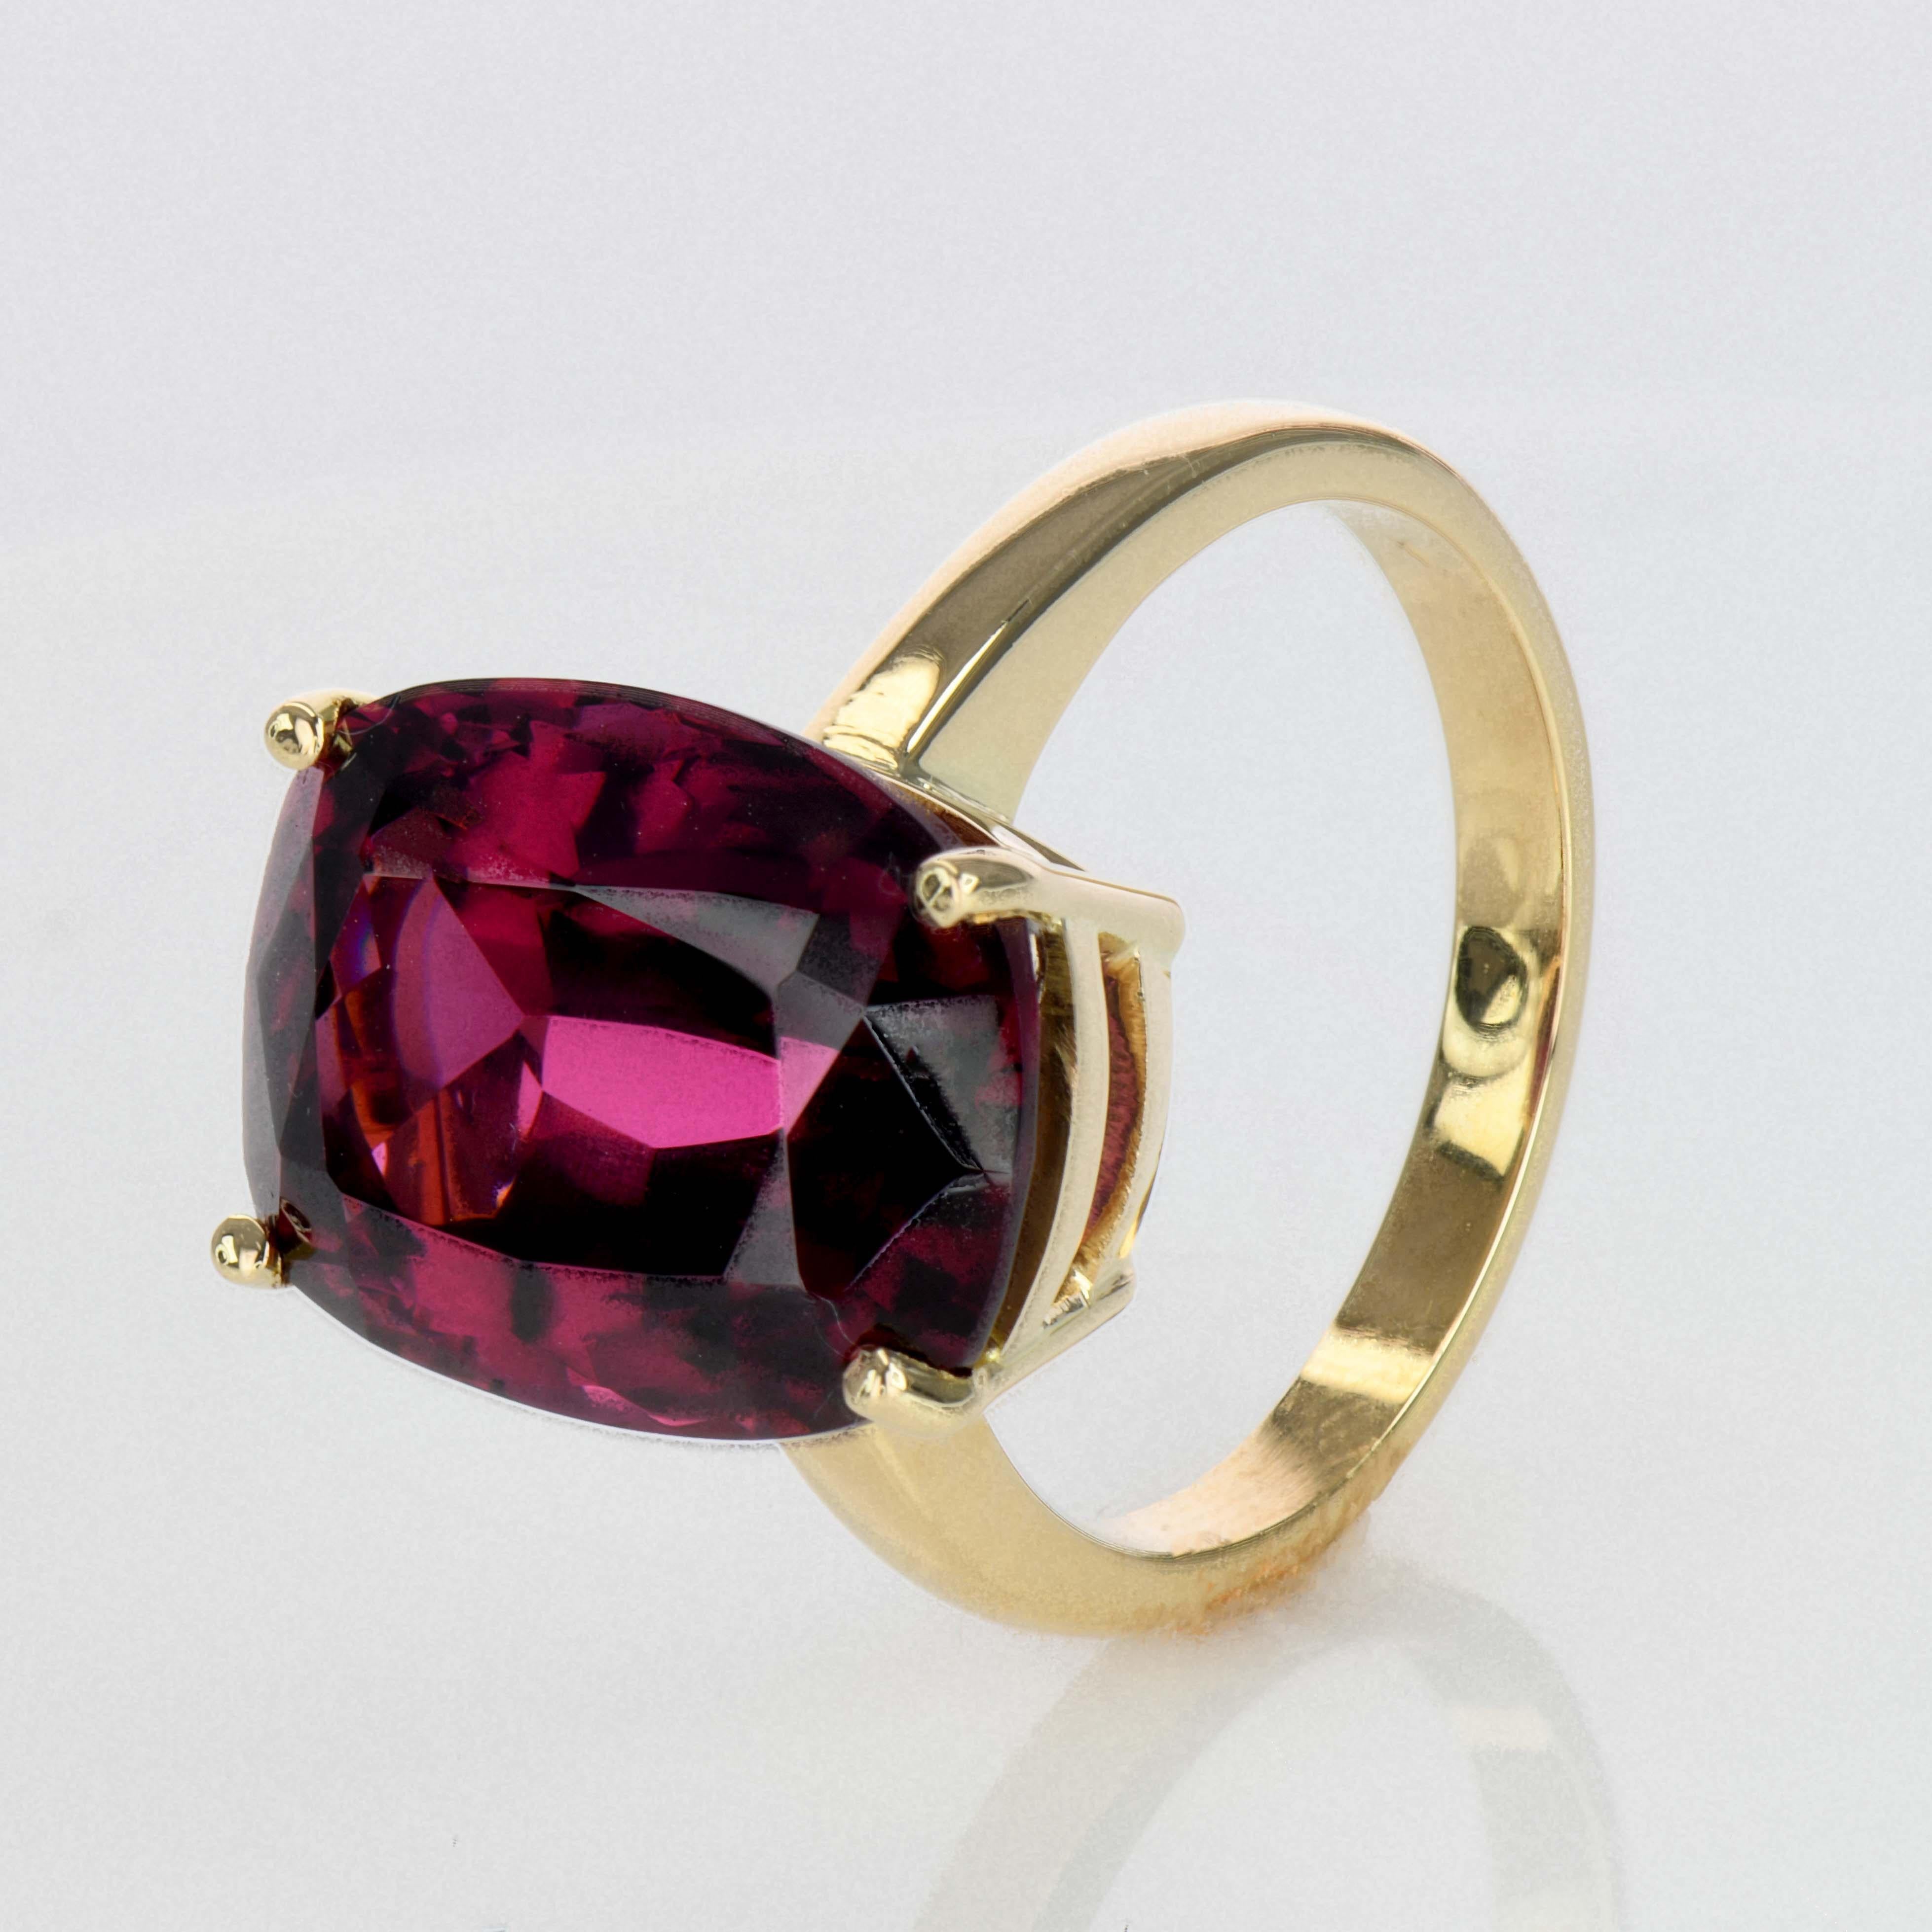 10.66ct Rhodolite Solitaire Ring-Cushion Cut-18KT Yellow Gold-GIA Certified For Sale